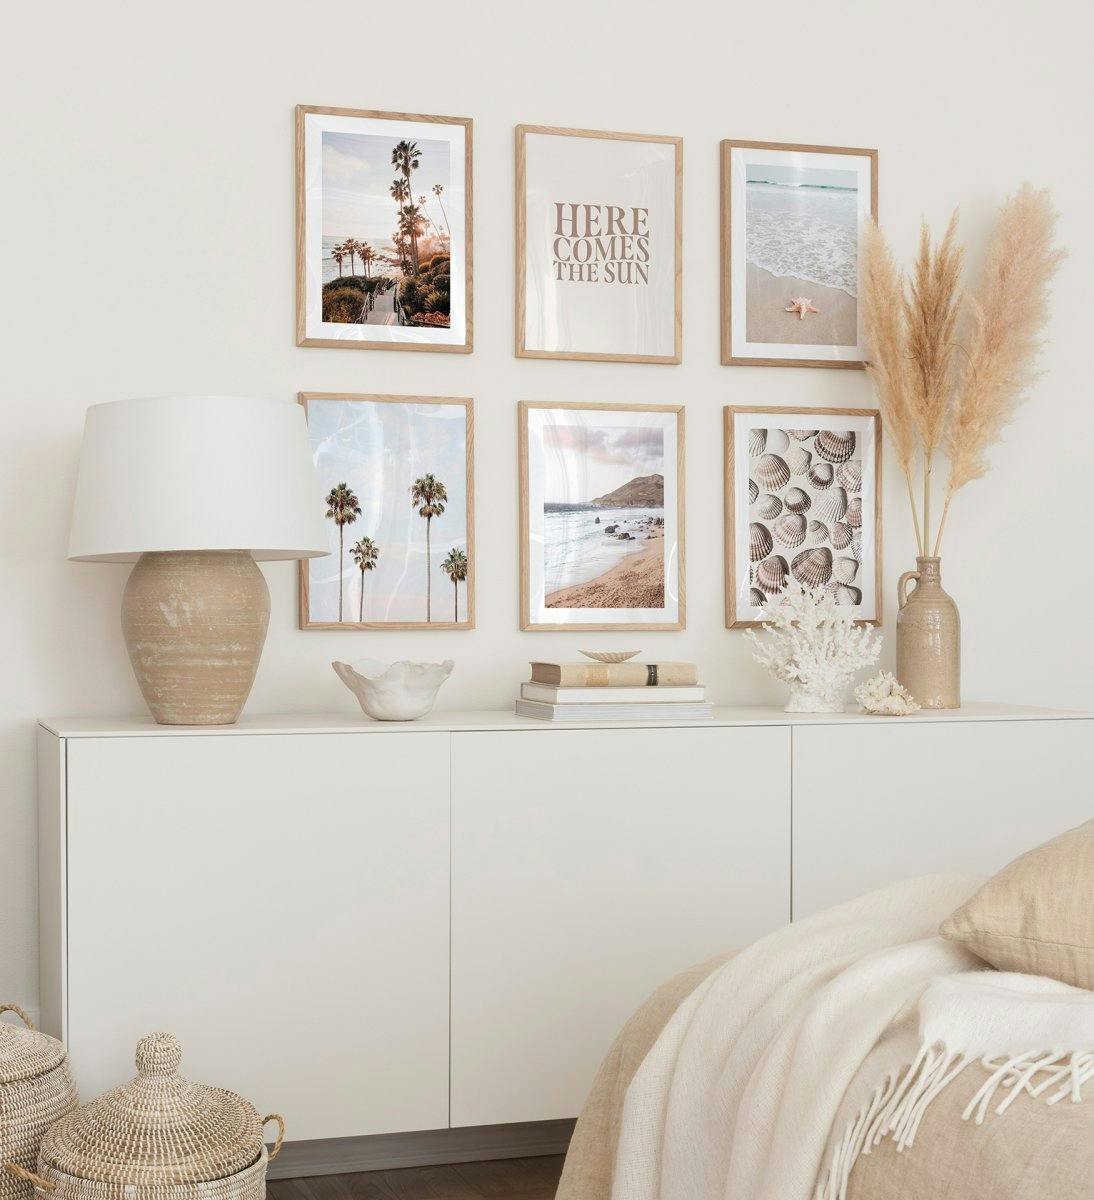 Bedroom gallery wall with tropical beach prints in wooden oak frames. 